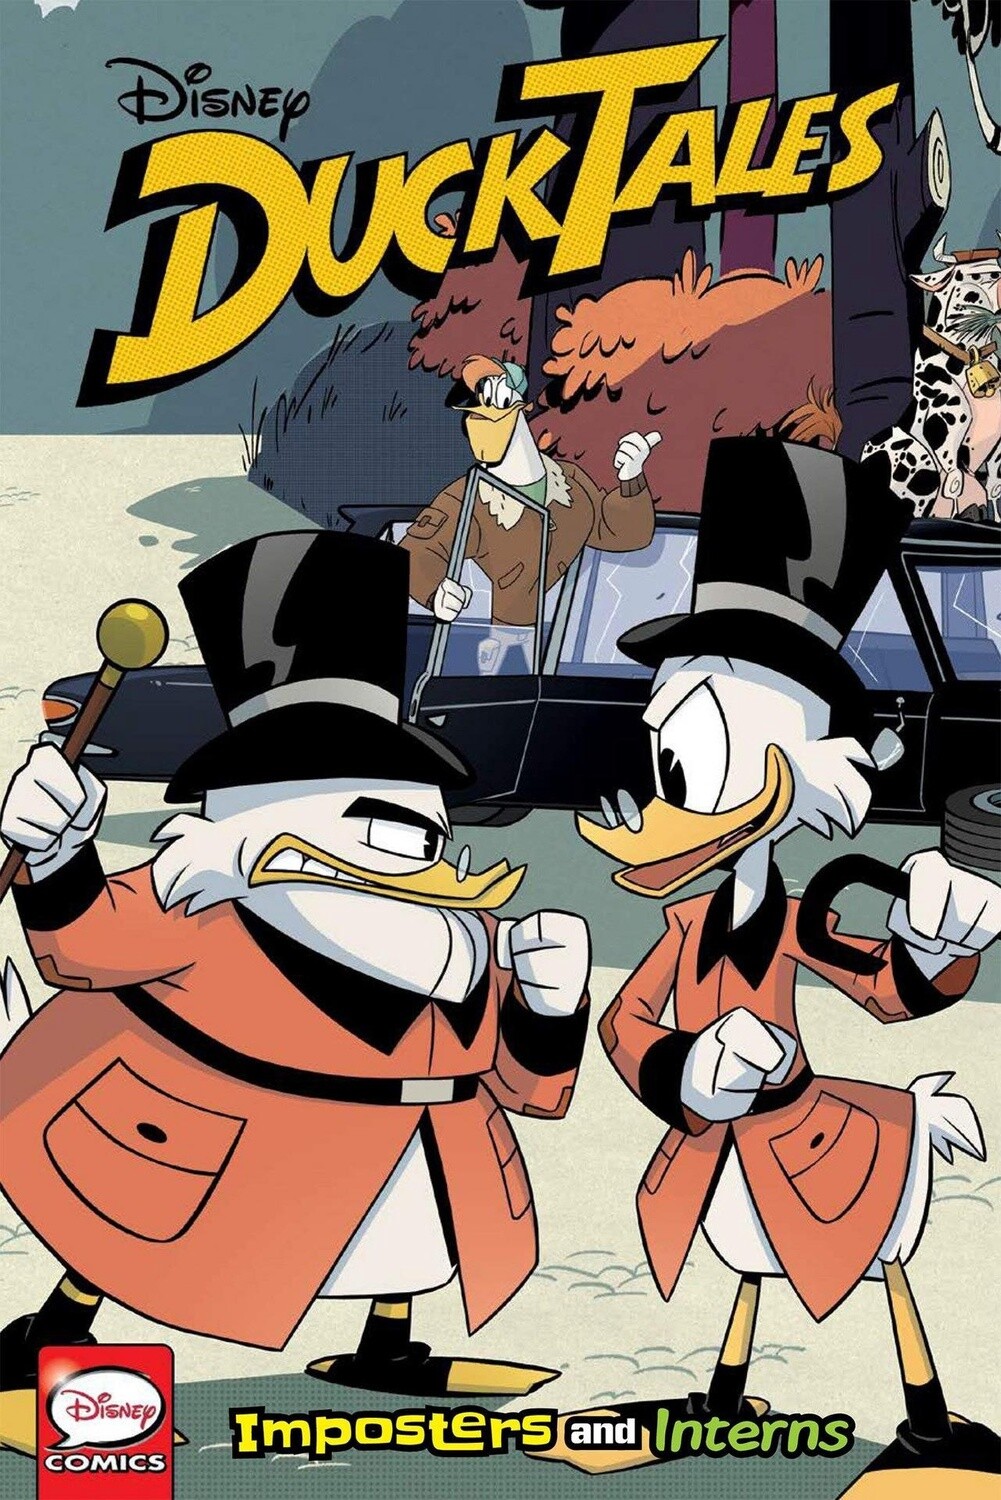 DuckTales: Imposters and Interns